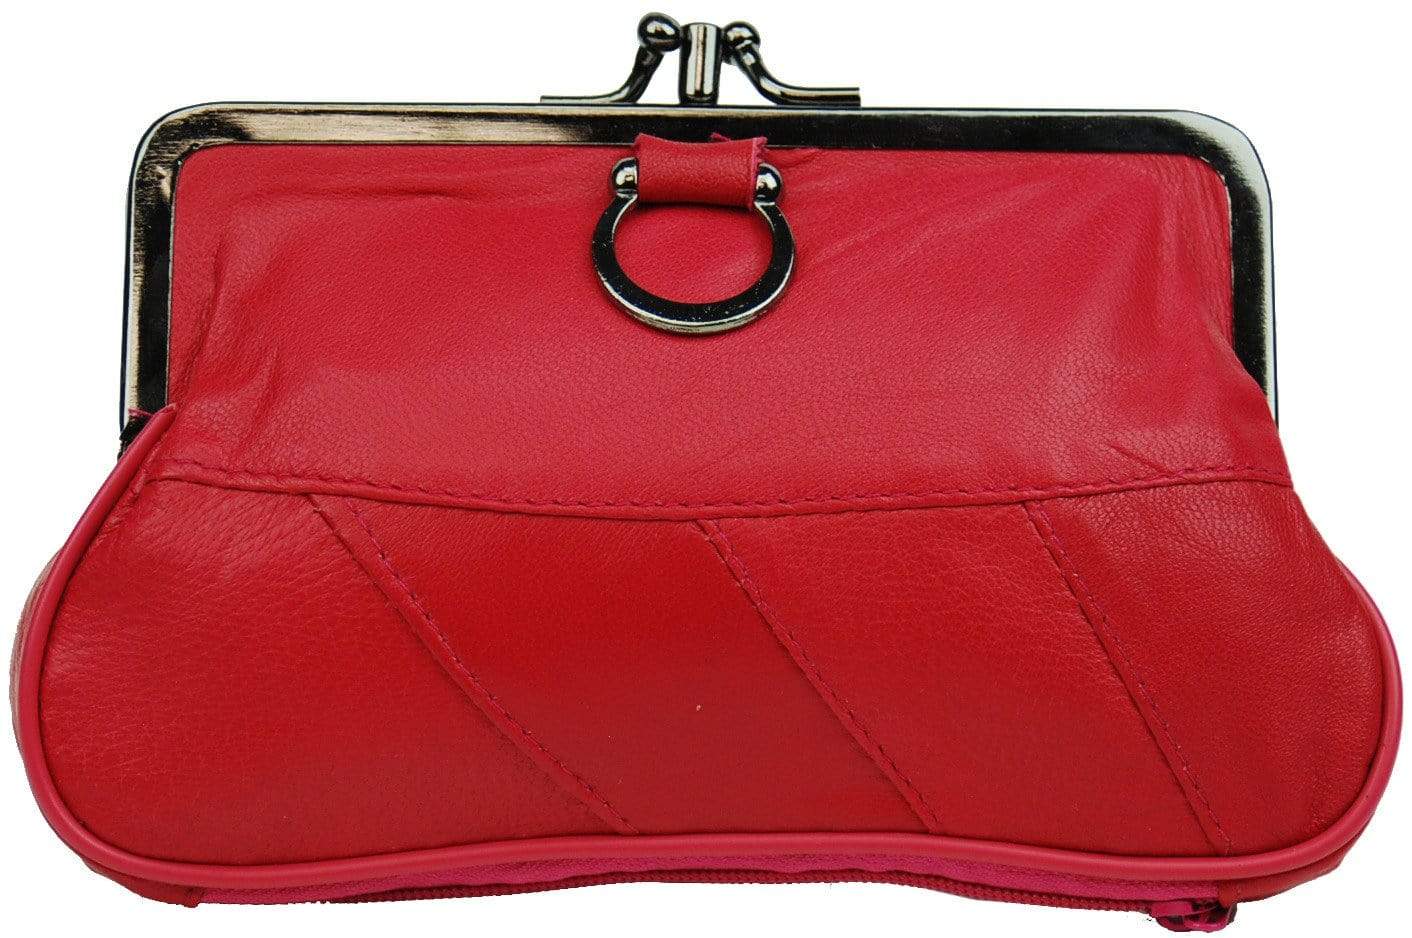 Marshal Genuine Leather Change Purse with Clasp Closure 11-3016 Red